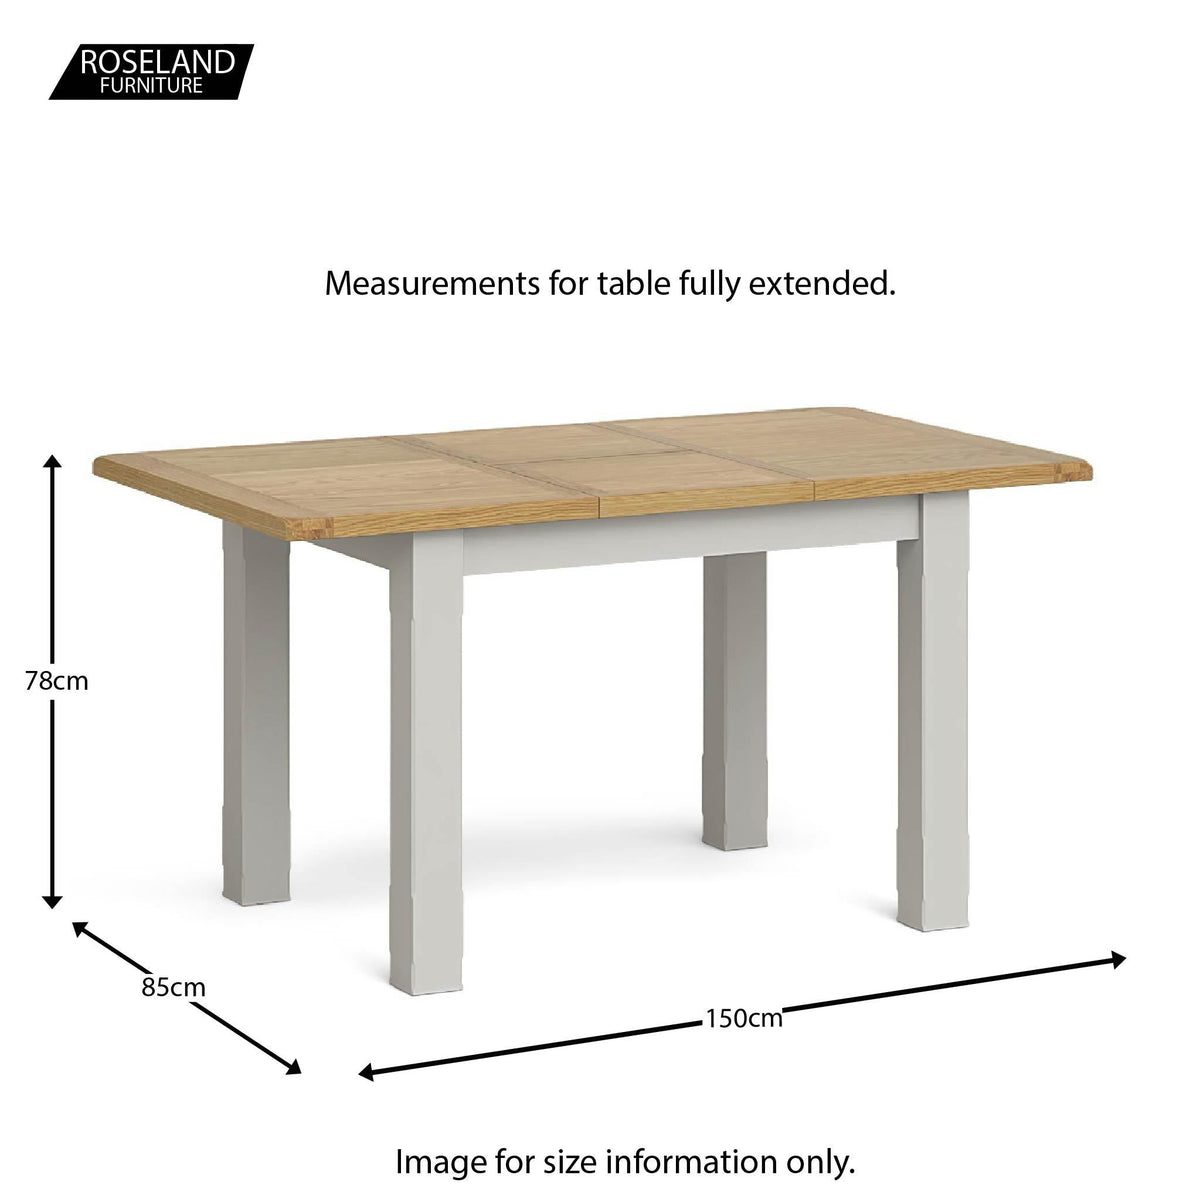 Lundy Grey Compact Extending Dining Table - Extended size guide